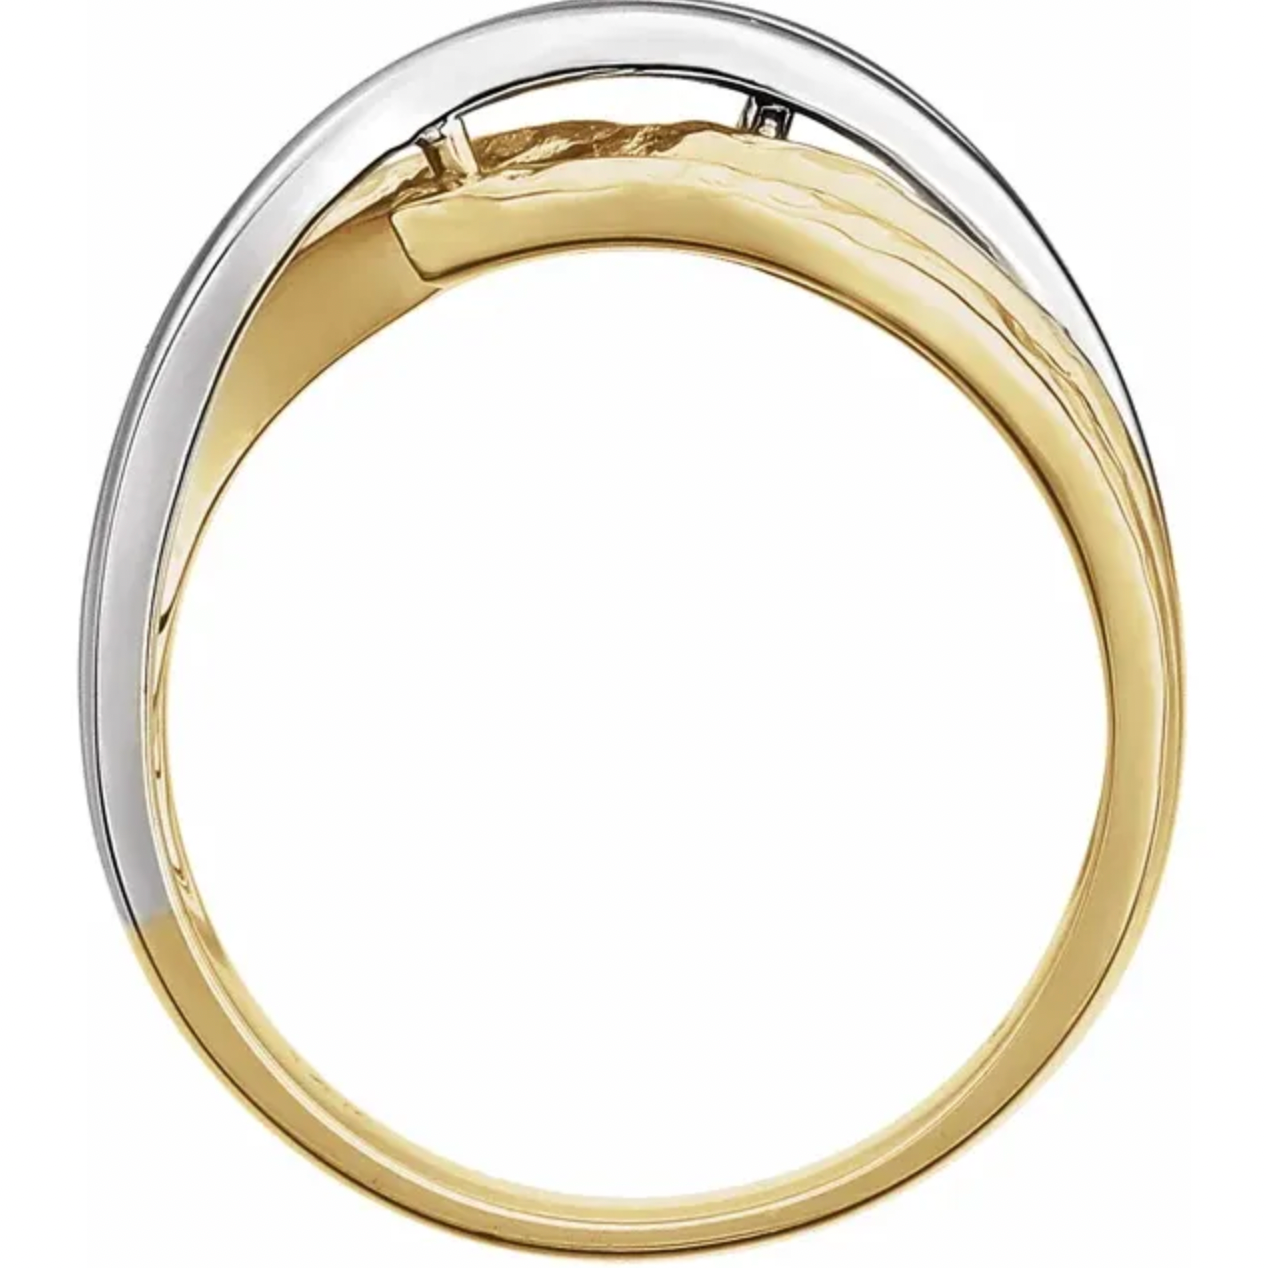 14KT White Gold + Yellow Gold Hammered Cigar Band Domed Ring